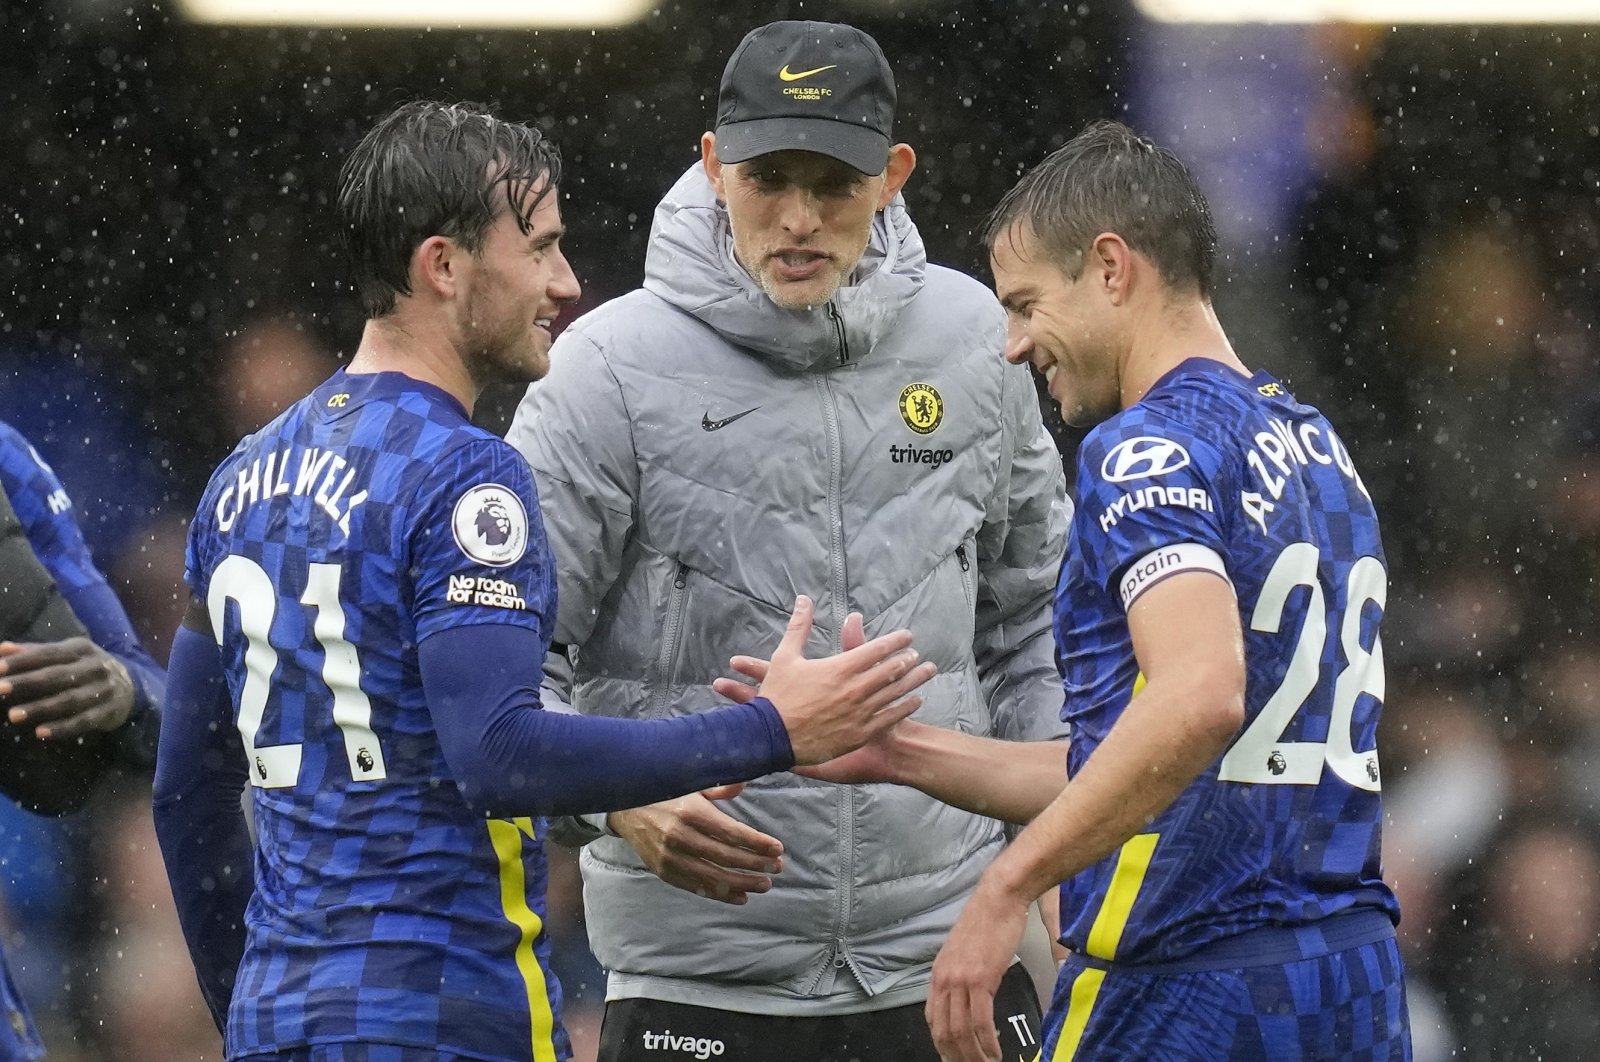 Chelsea&#039;s head coach Thomas Tuchel, center, celebrates with Ben Chilwell, left, and Cesar Azpilicueta after the English Premier League soccer match between Chelsea and Southampton at Stamford Bridge Stadium in London, Saturday, Oct. 2, 2021. (AP Photo)